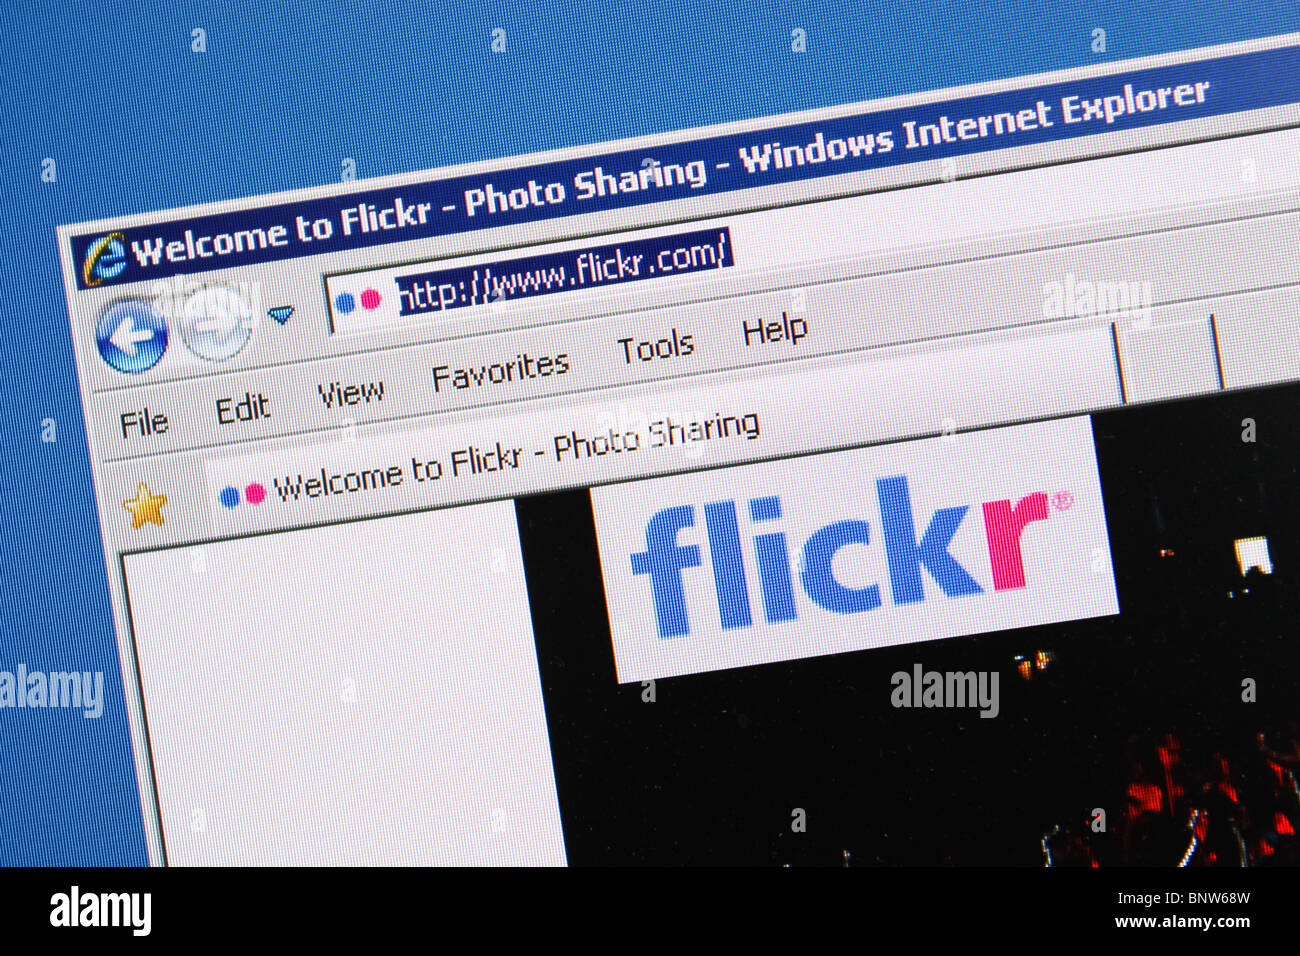 flickr share photo video online Stock Photo